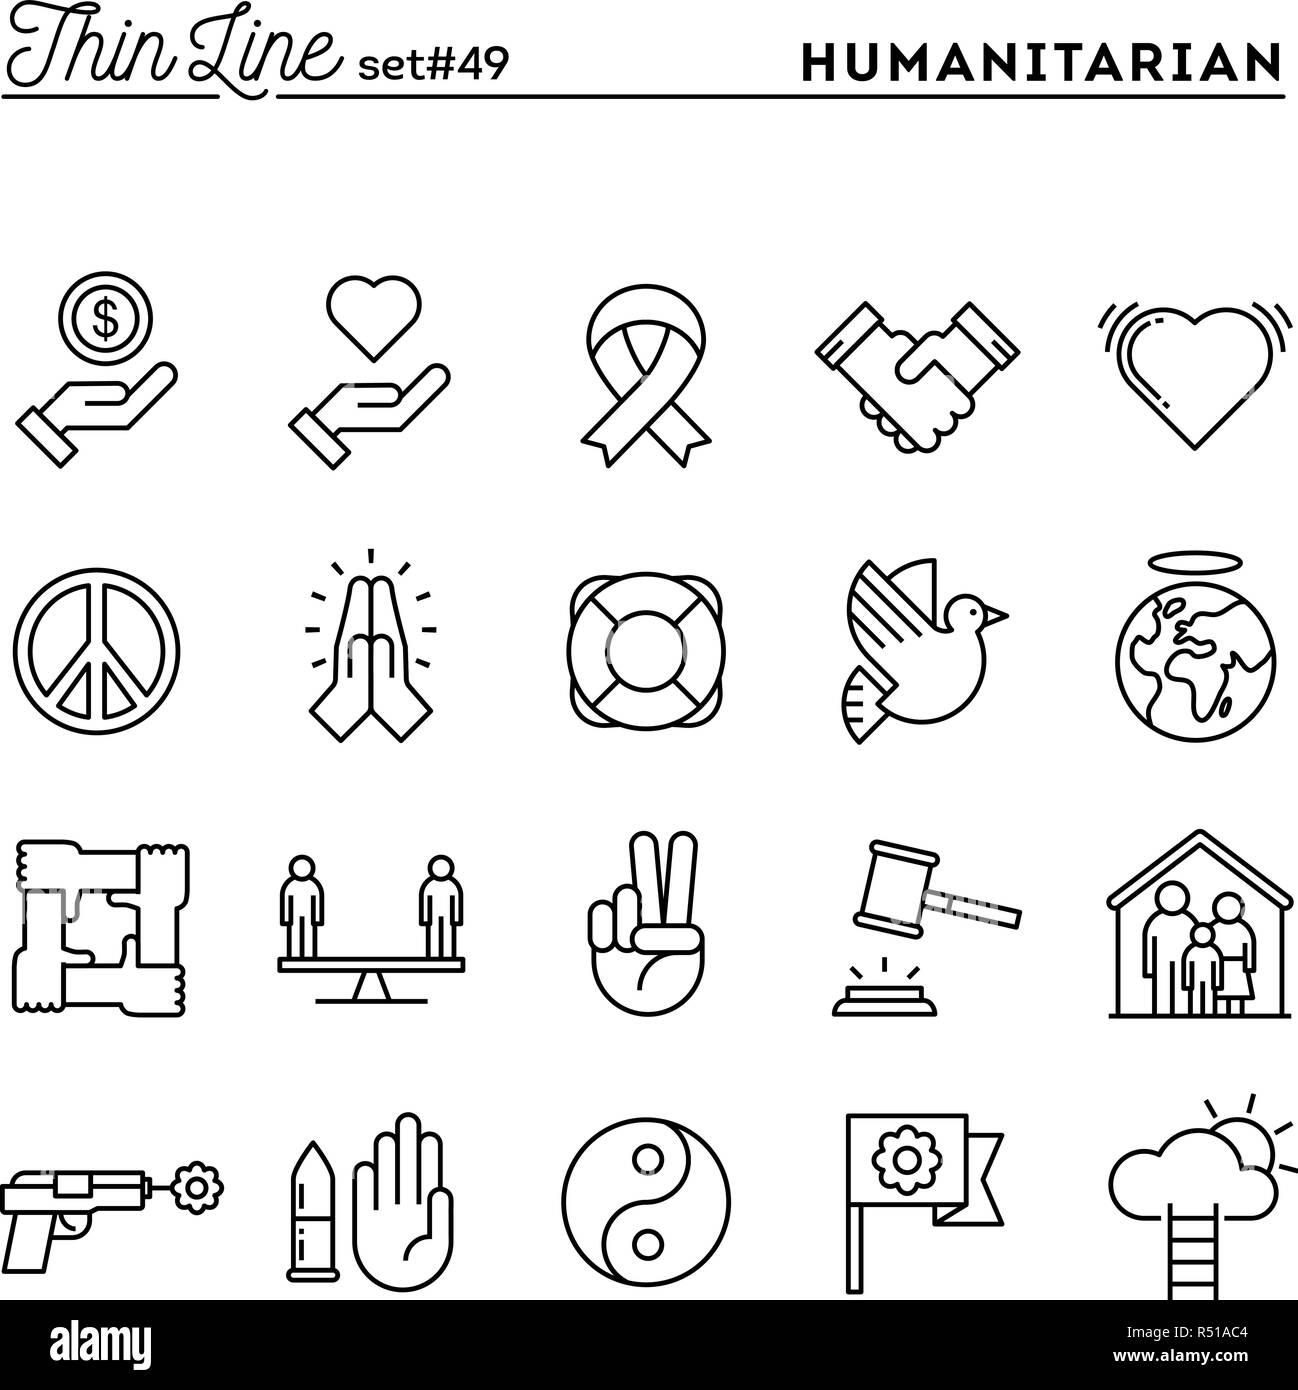 Humanitarian, peace, justice, human rights and more, thin line icons set Stock Vector